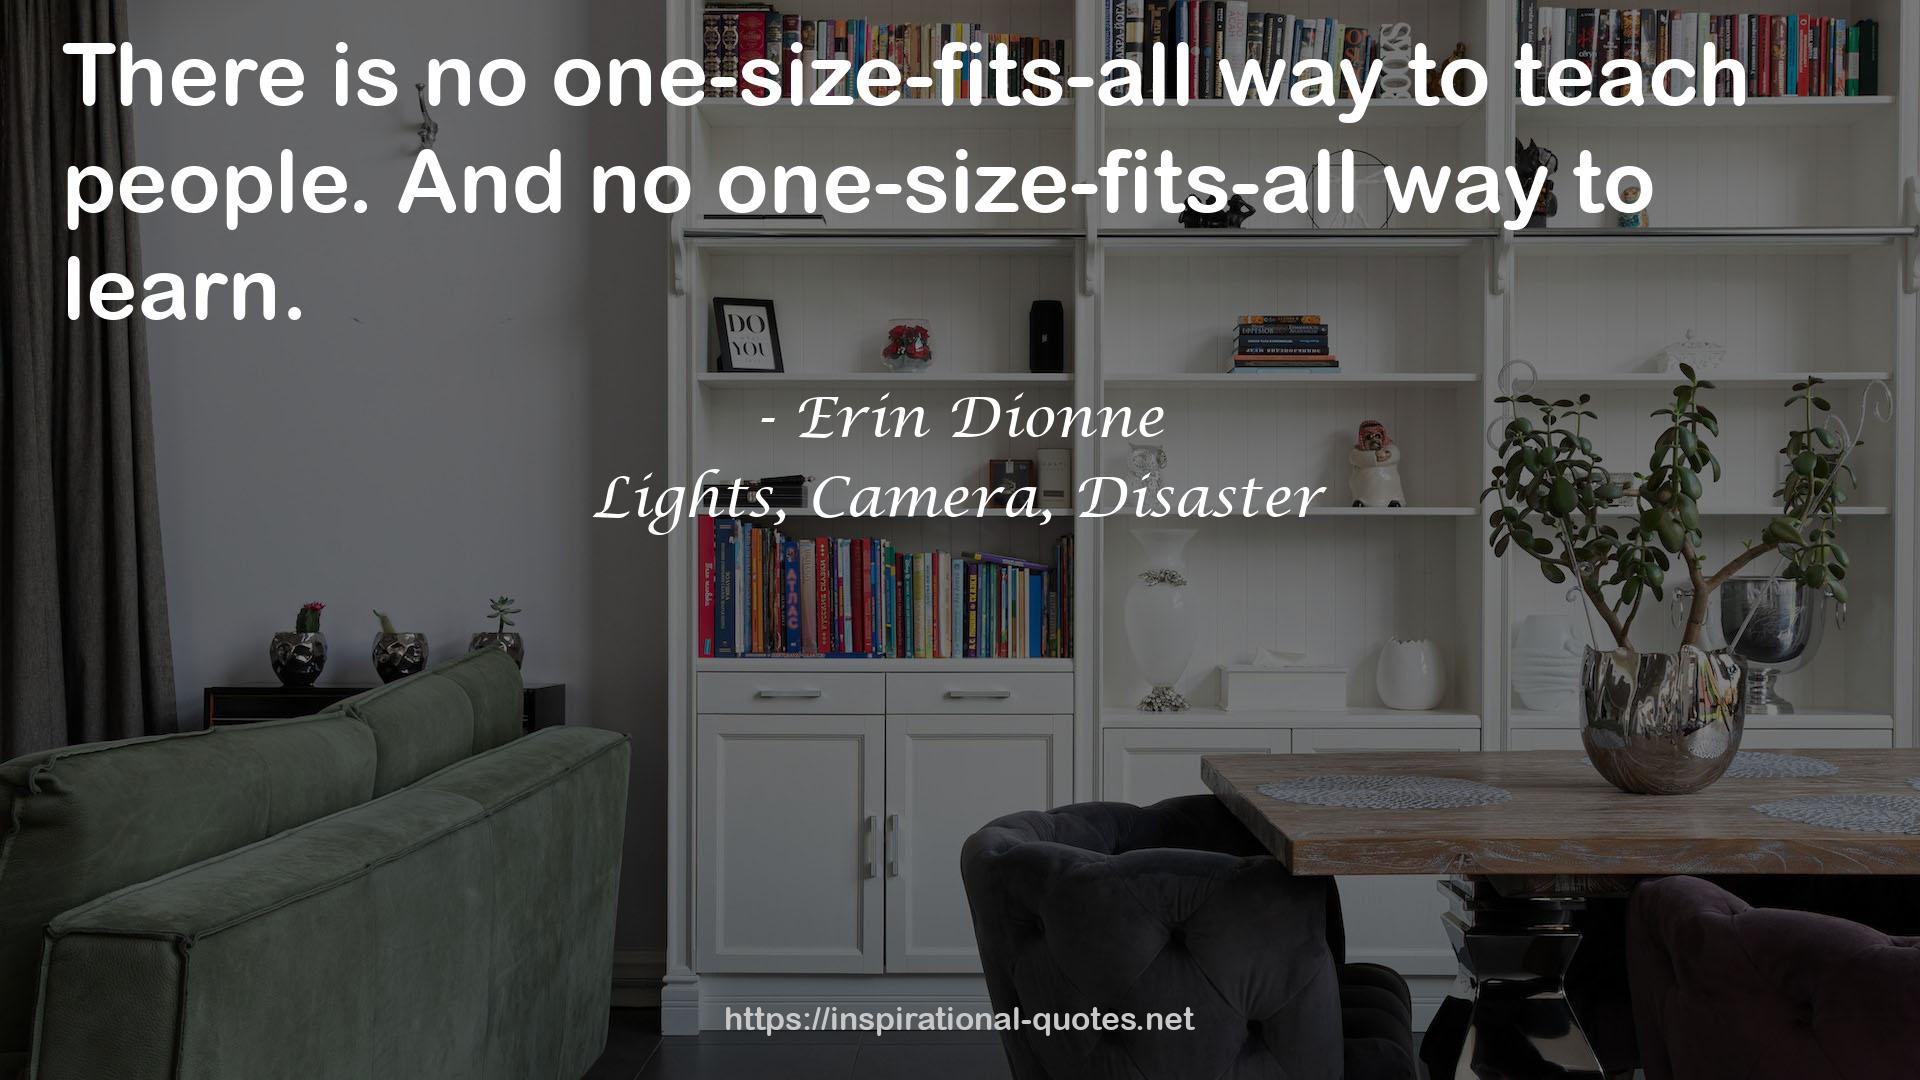 Lights, Camera, Disaster QUOTES